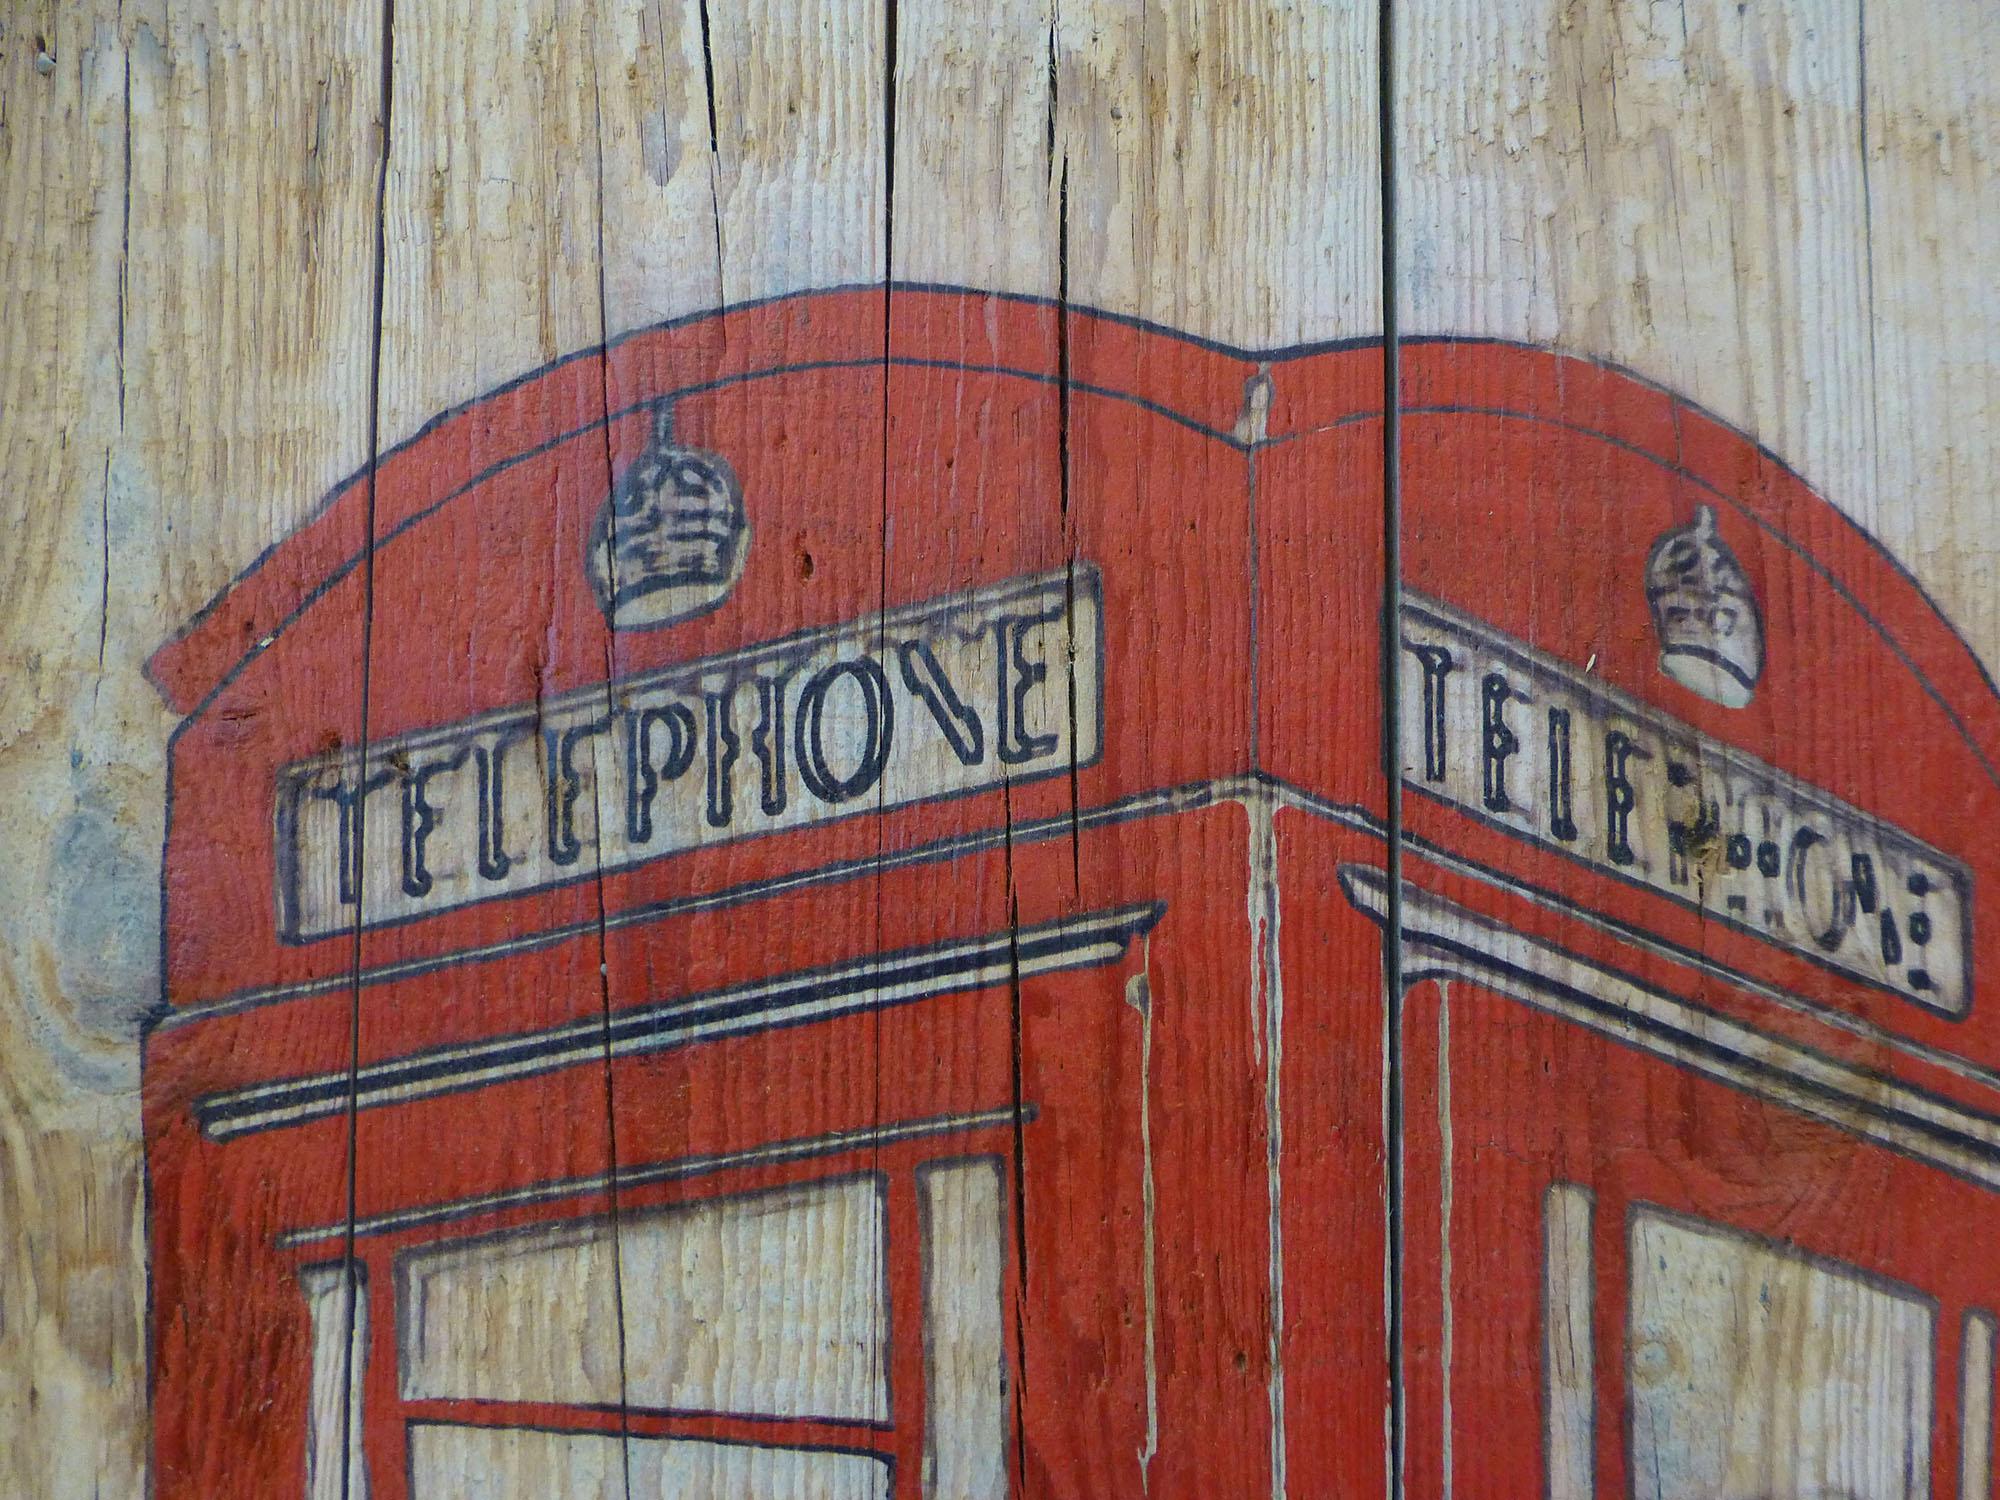 London Phone Box By Michael Wallner [2018]

limited_edition
reclaimed wood, steel
Edition number 20
Image size: H:135 cm x W:72 cm
Complete Size of Unframed Work: H:135 cm x W:72 cm x D:3cm
Sold Unframed
Please note that insitu images are purely an